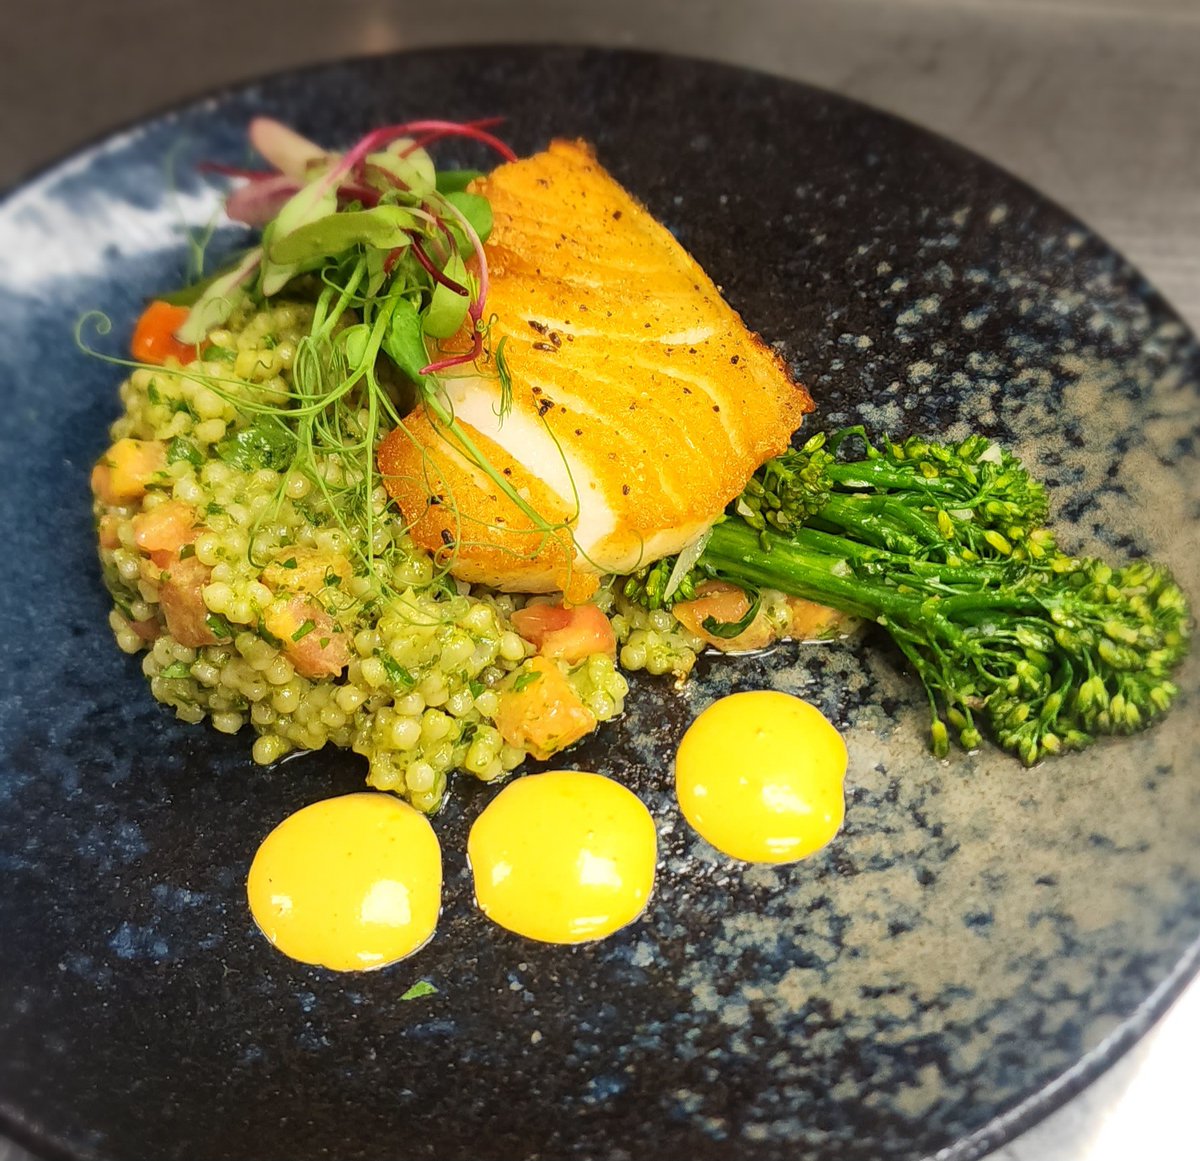 Get your tastebuds ready!. Chef Taylor's Chilean Sea Bass seared to perfection, accompanied by a fresh Tomato-Pesto Israeli Cous Cous and a Saffron-Red Pepper Aioli with grilled Broccolini. Be first in line when we open for dinner at 4:30pm today because this will not last long.